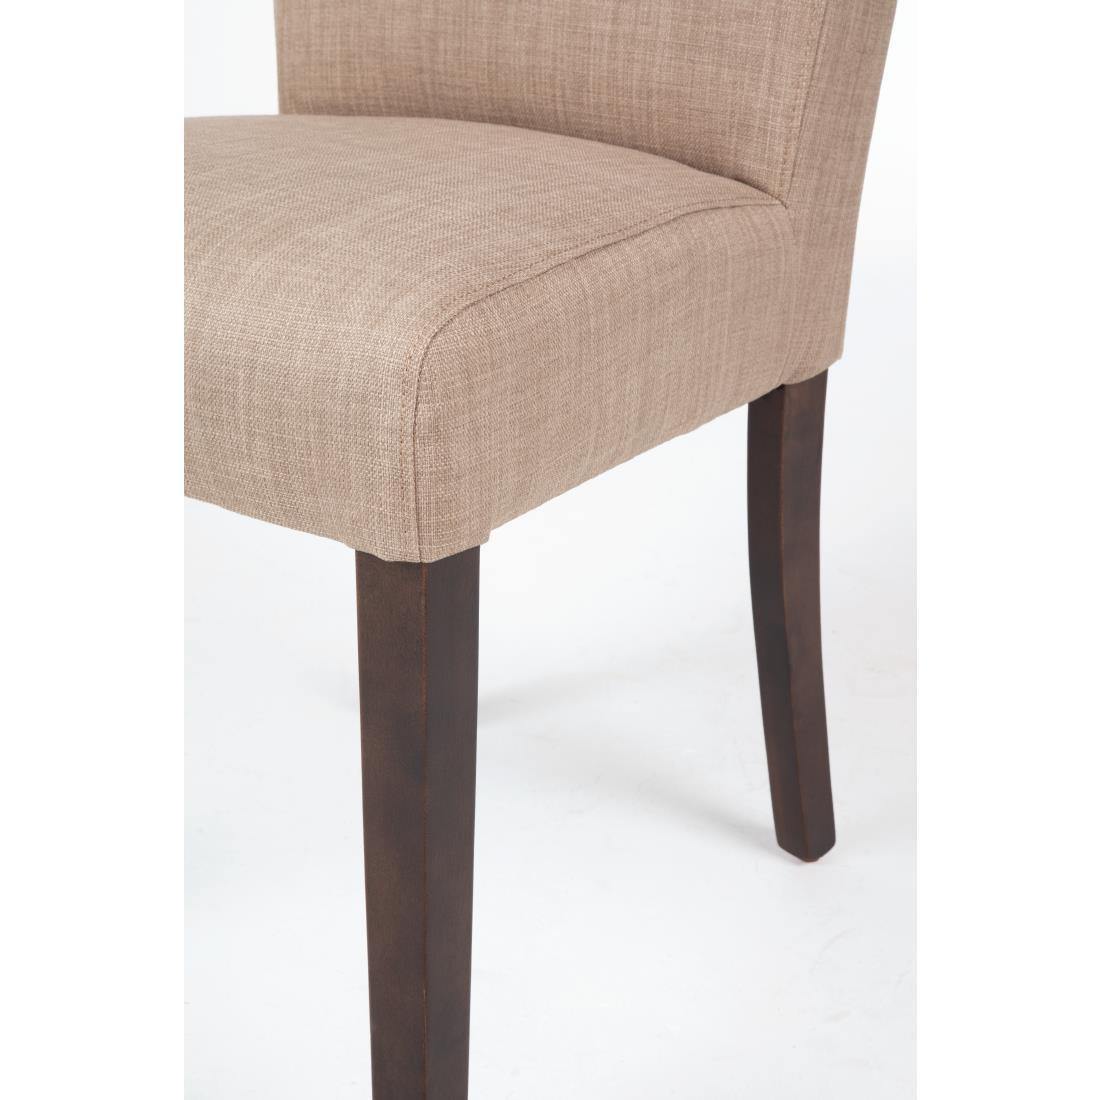 GR367 - Bolero Contemporary Dining Chair Natural (Pack 2) - GR367  - 5